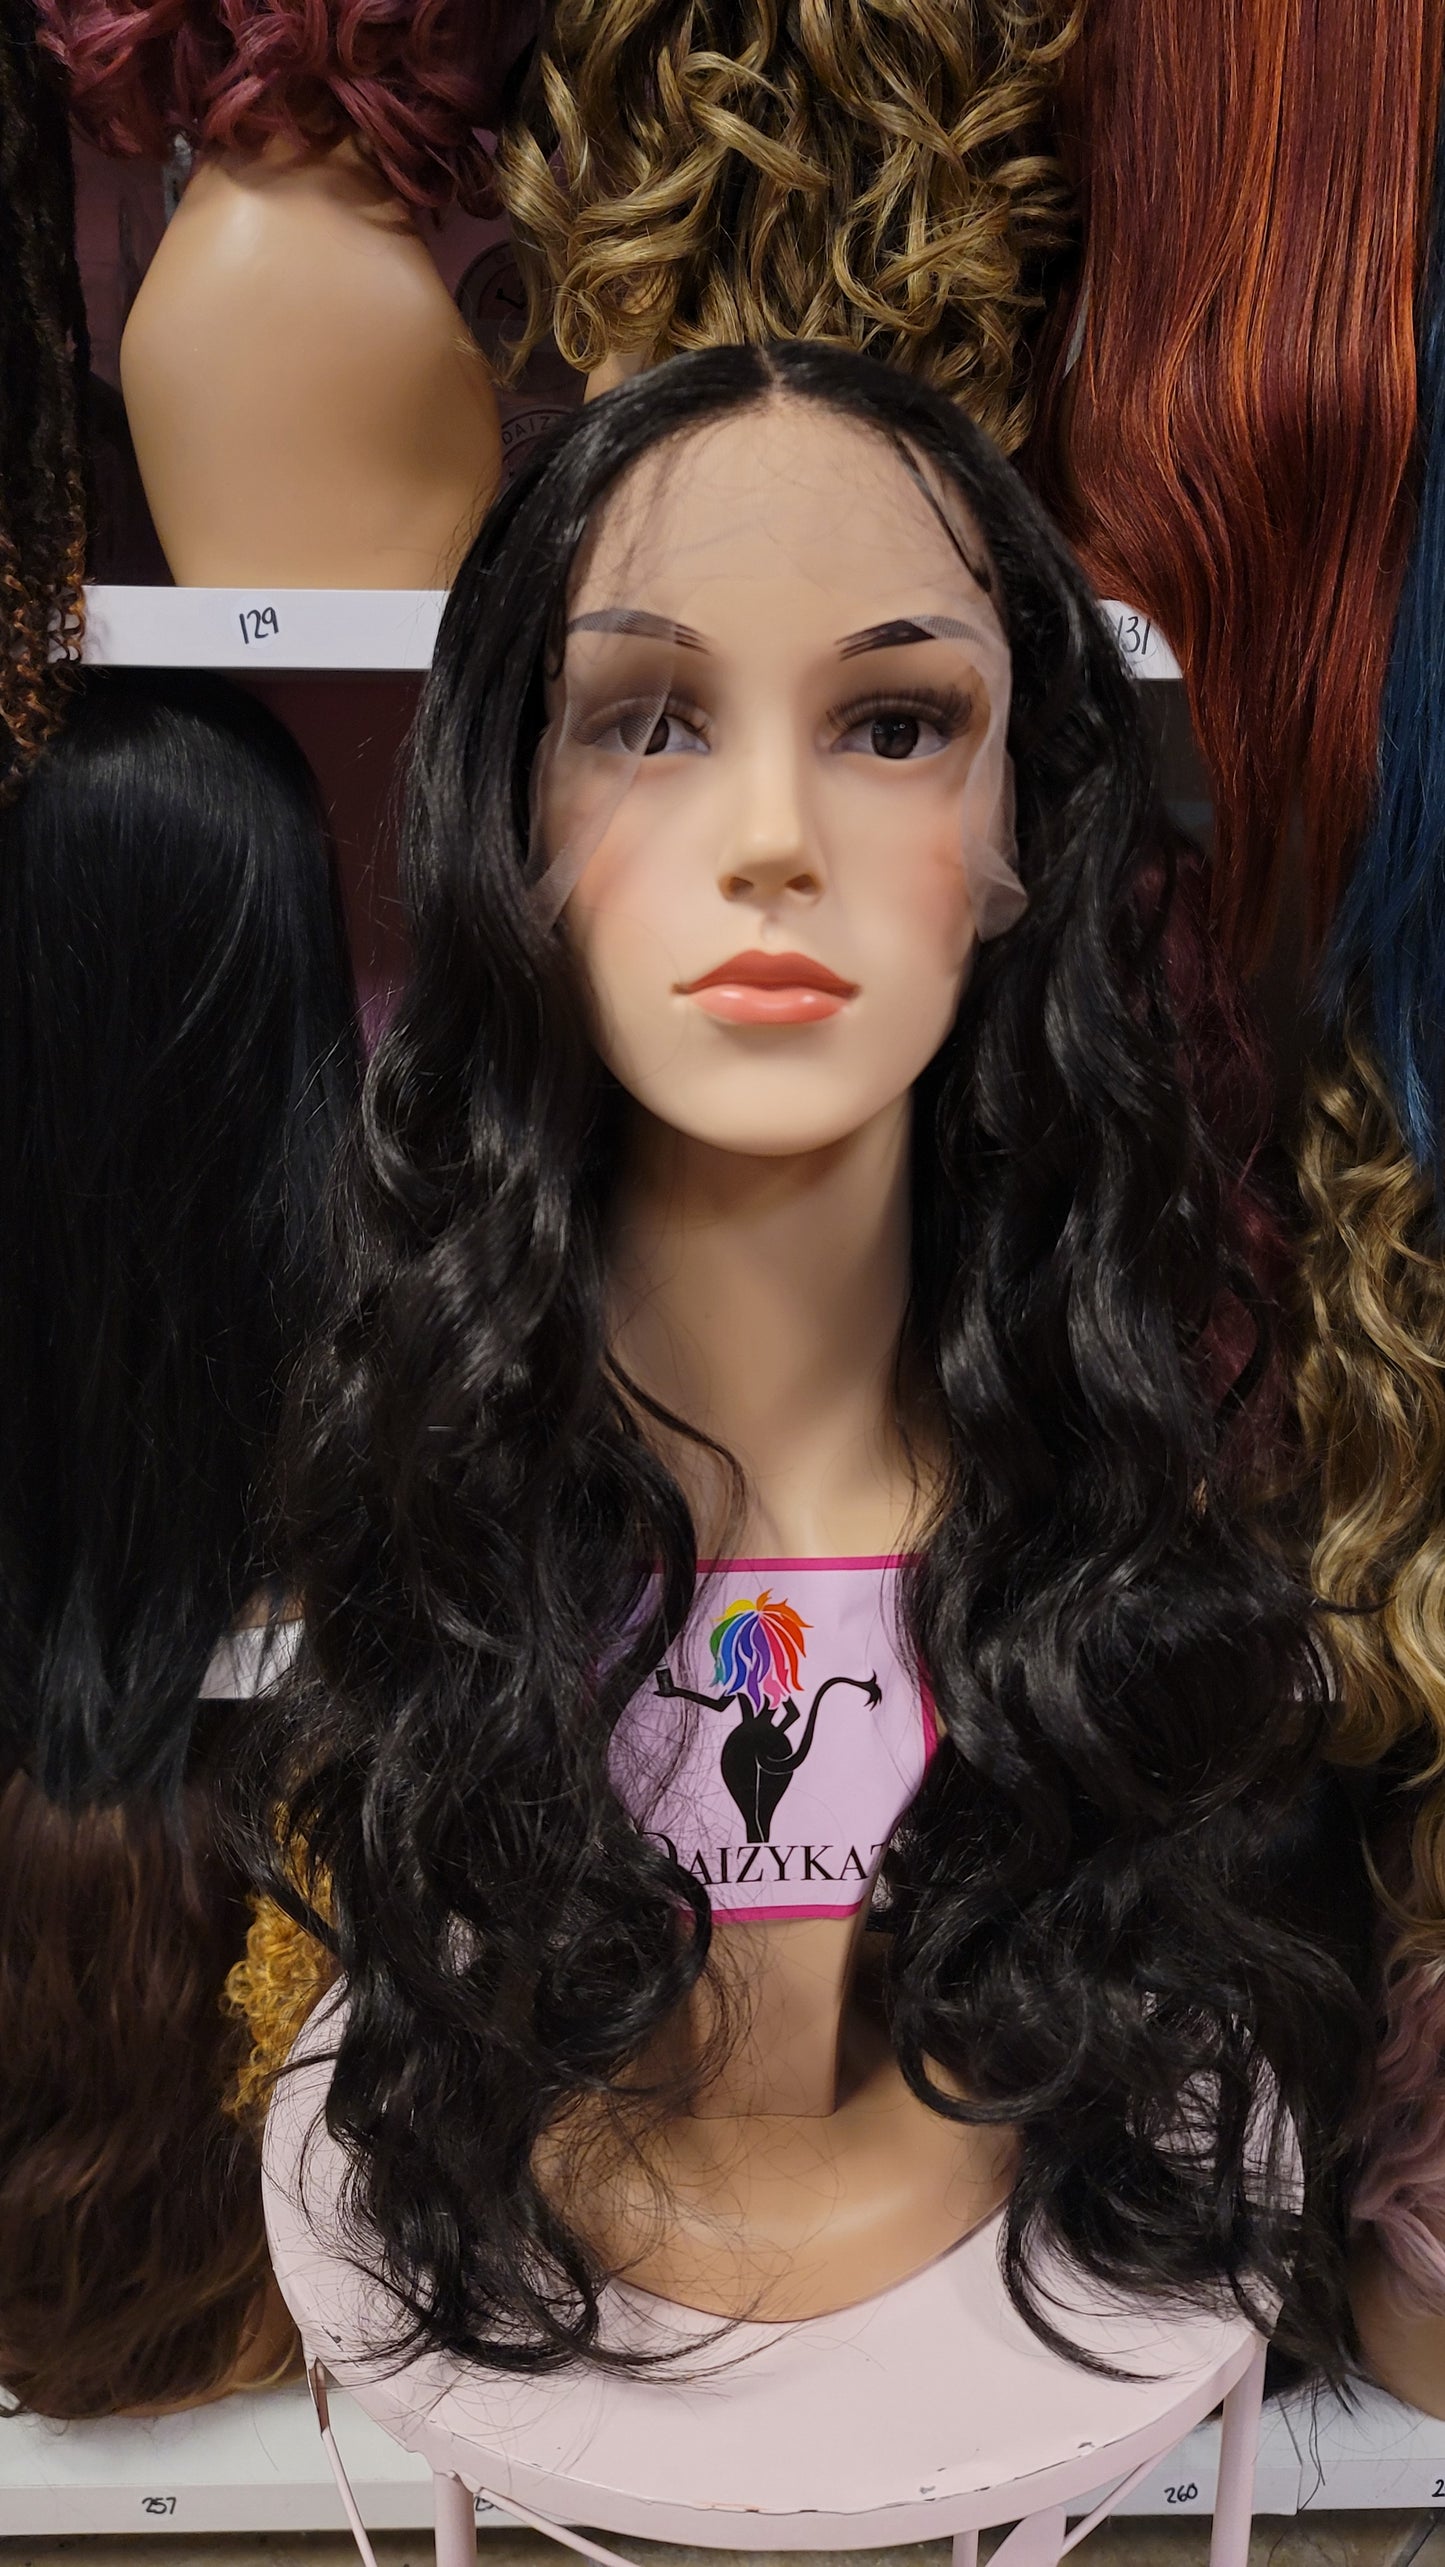 450 Katie - Middle Part Lace Front Wig - 2 - DaizyKat Cosmetics 450 Katie - Middle Part Lace Front Wig - 2 DaizyKat Cosmetics Wigs